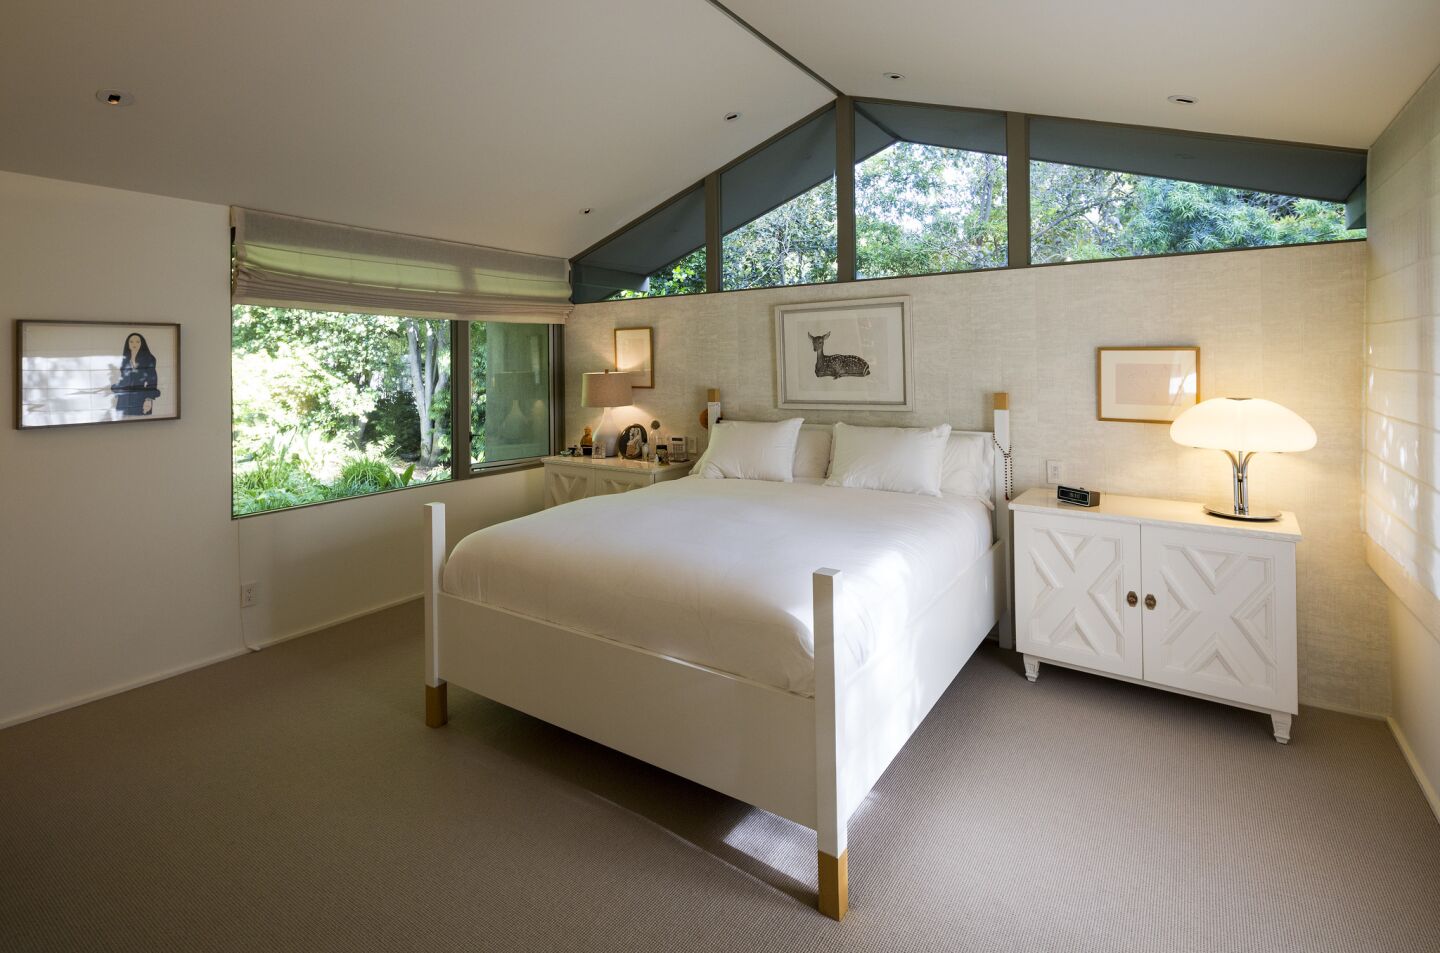 Homeowner Jenny Levy wanted as much light as possible. In the master bedroom, architect John Bertram added clerestory windows to bring in more light.